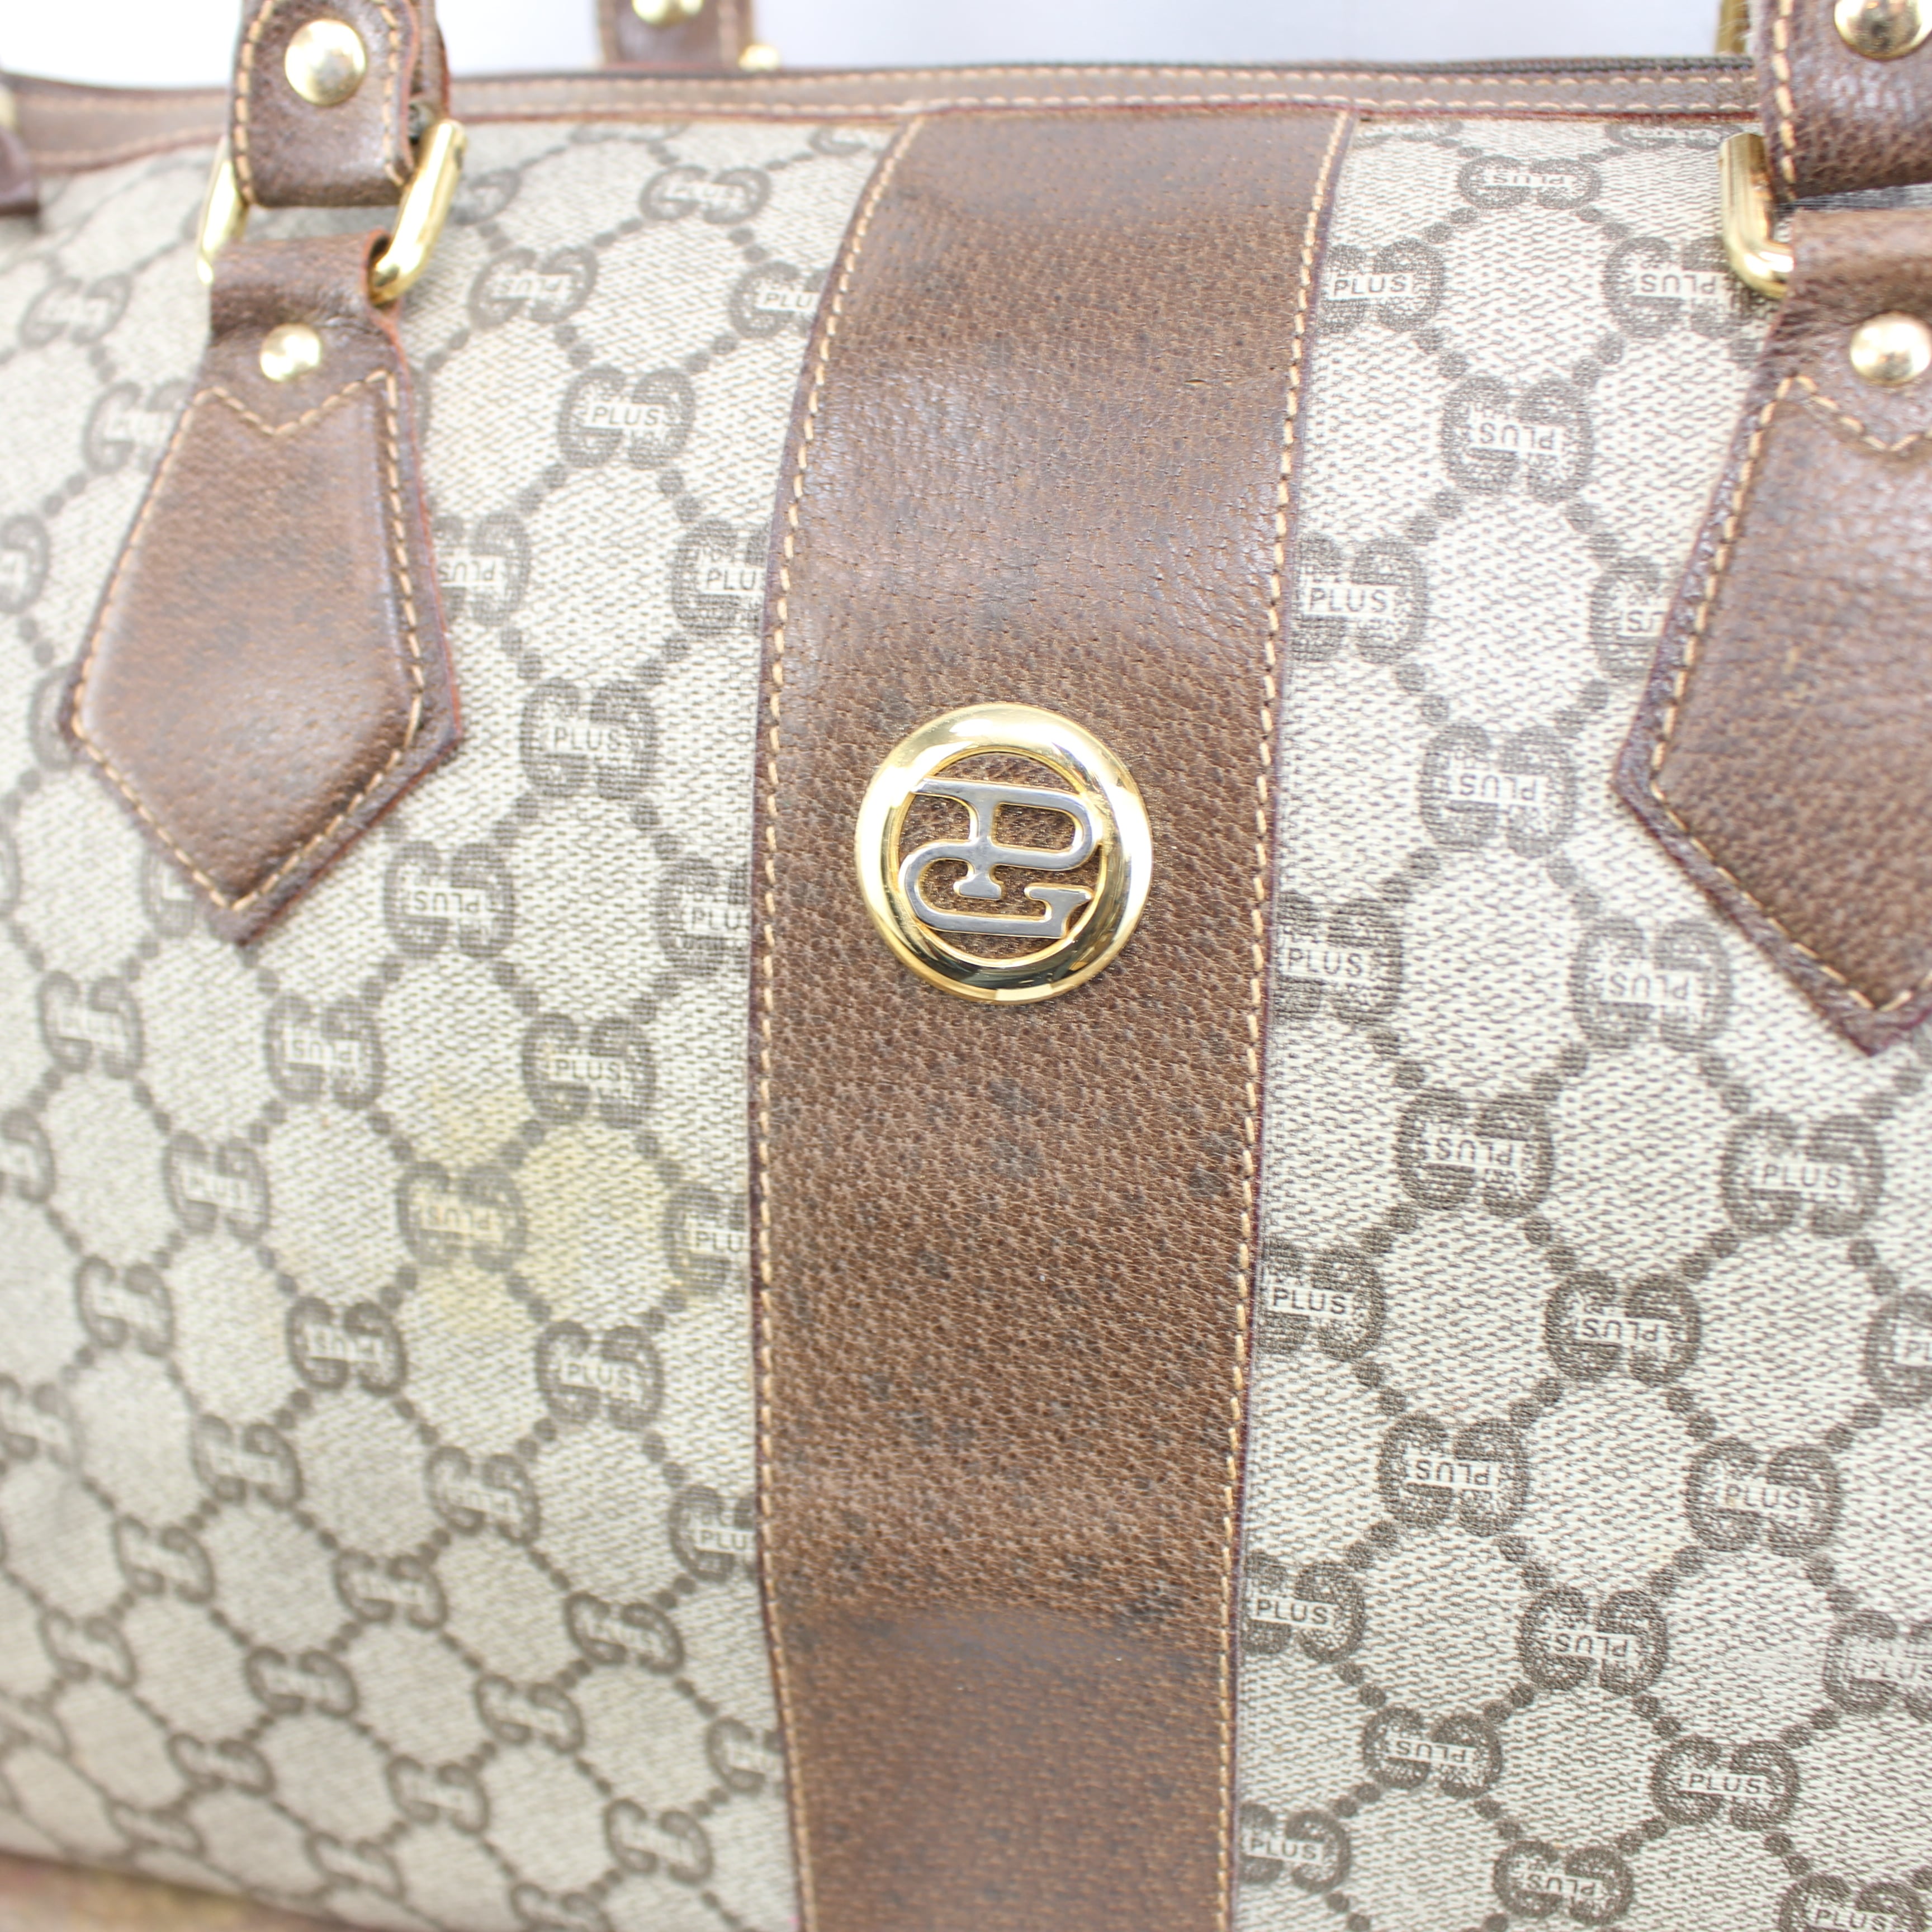 OLD GUCCI PLUS GG PATTERNED LOGO BOSTON BAG MADE IN ITALY/オールド